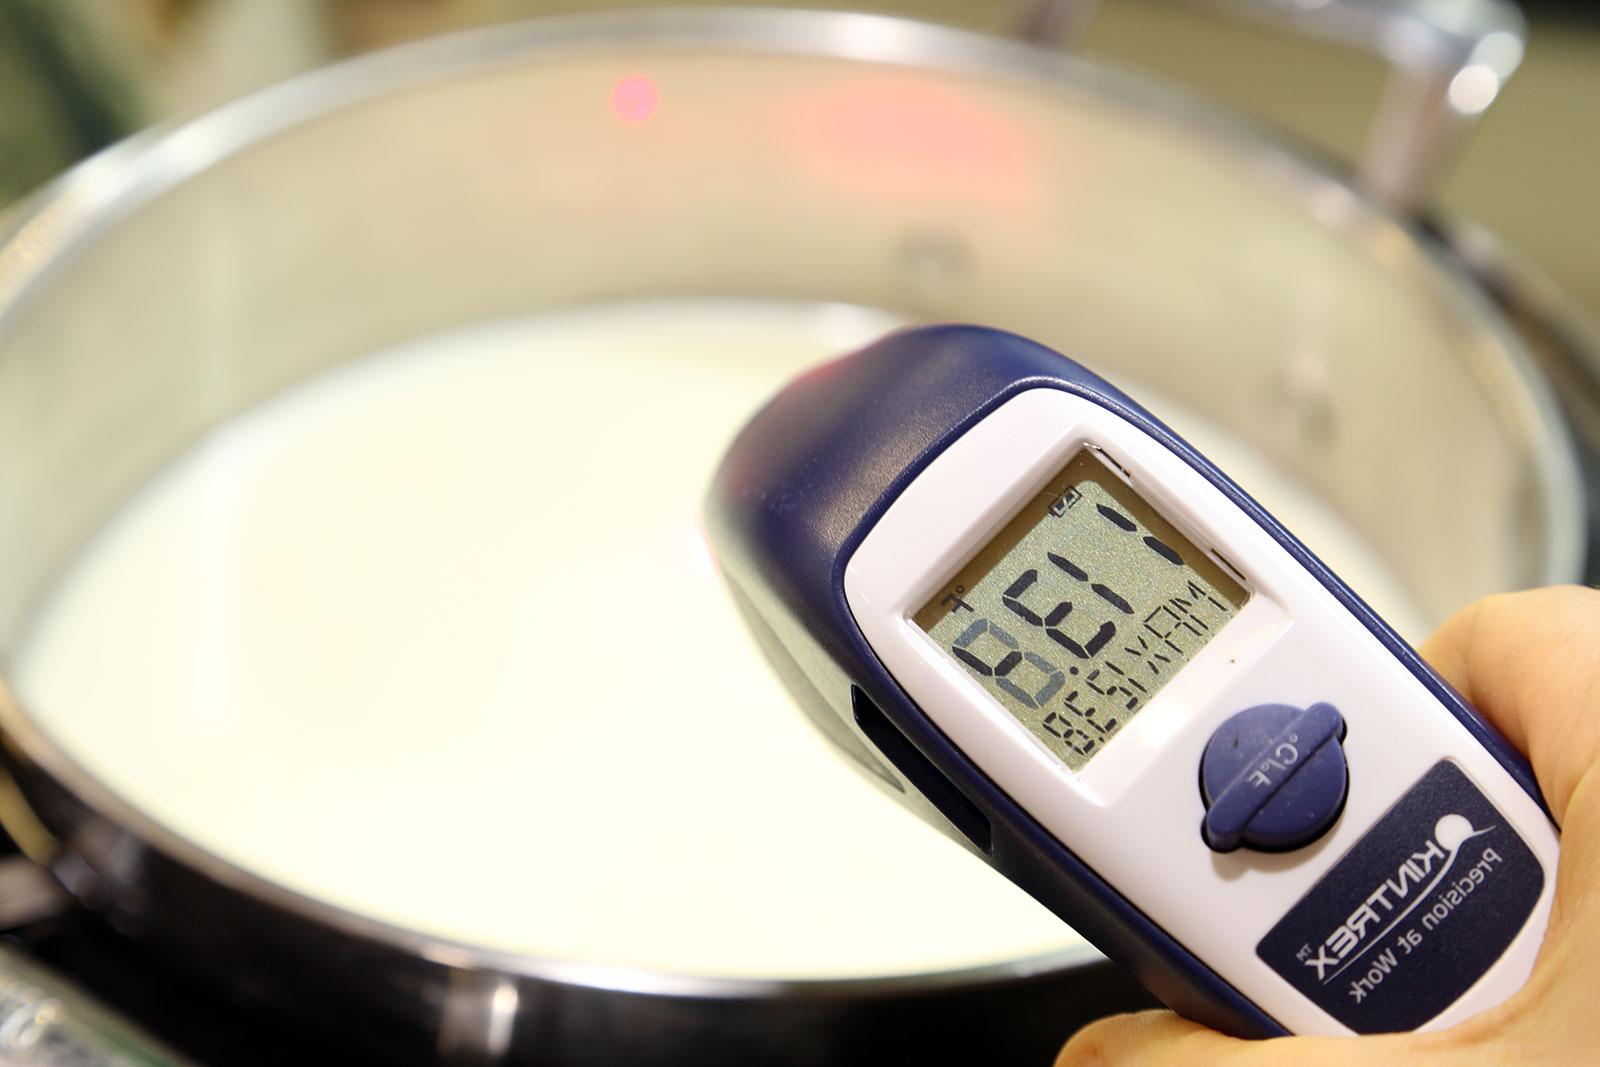 The heated and cooled milk is ready to be poured into jars with yogurt culture.